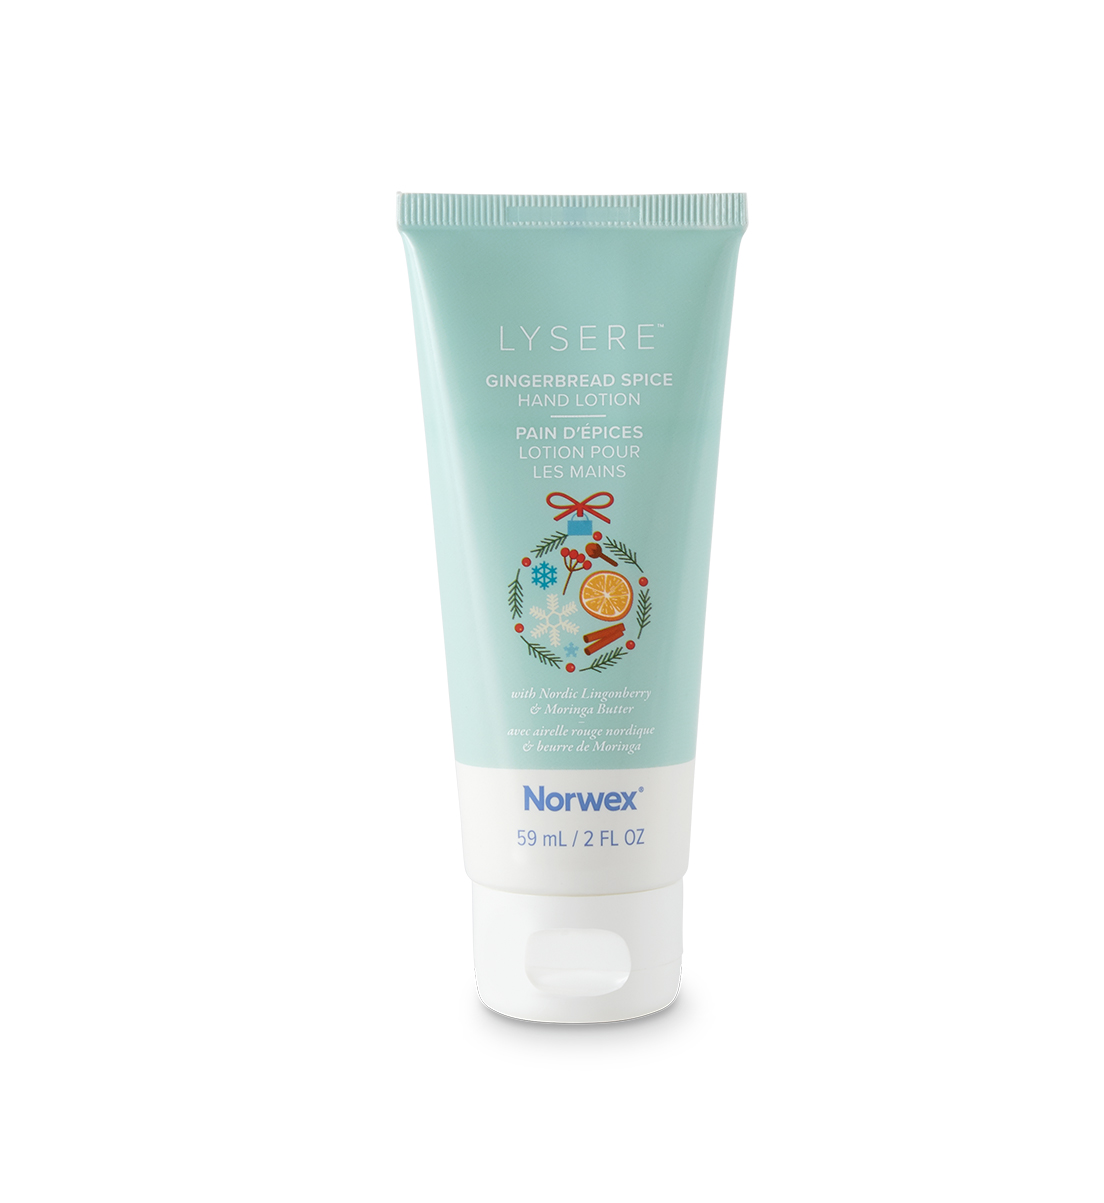 Lysere Gingerbread Spice Hand Lotion